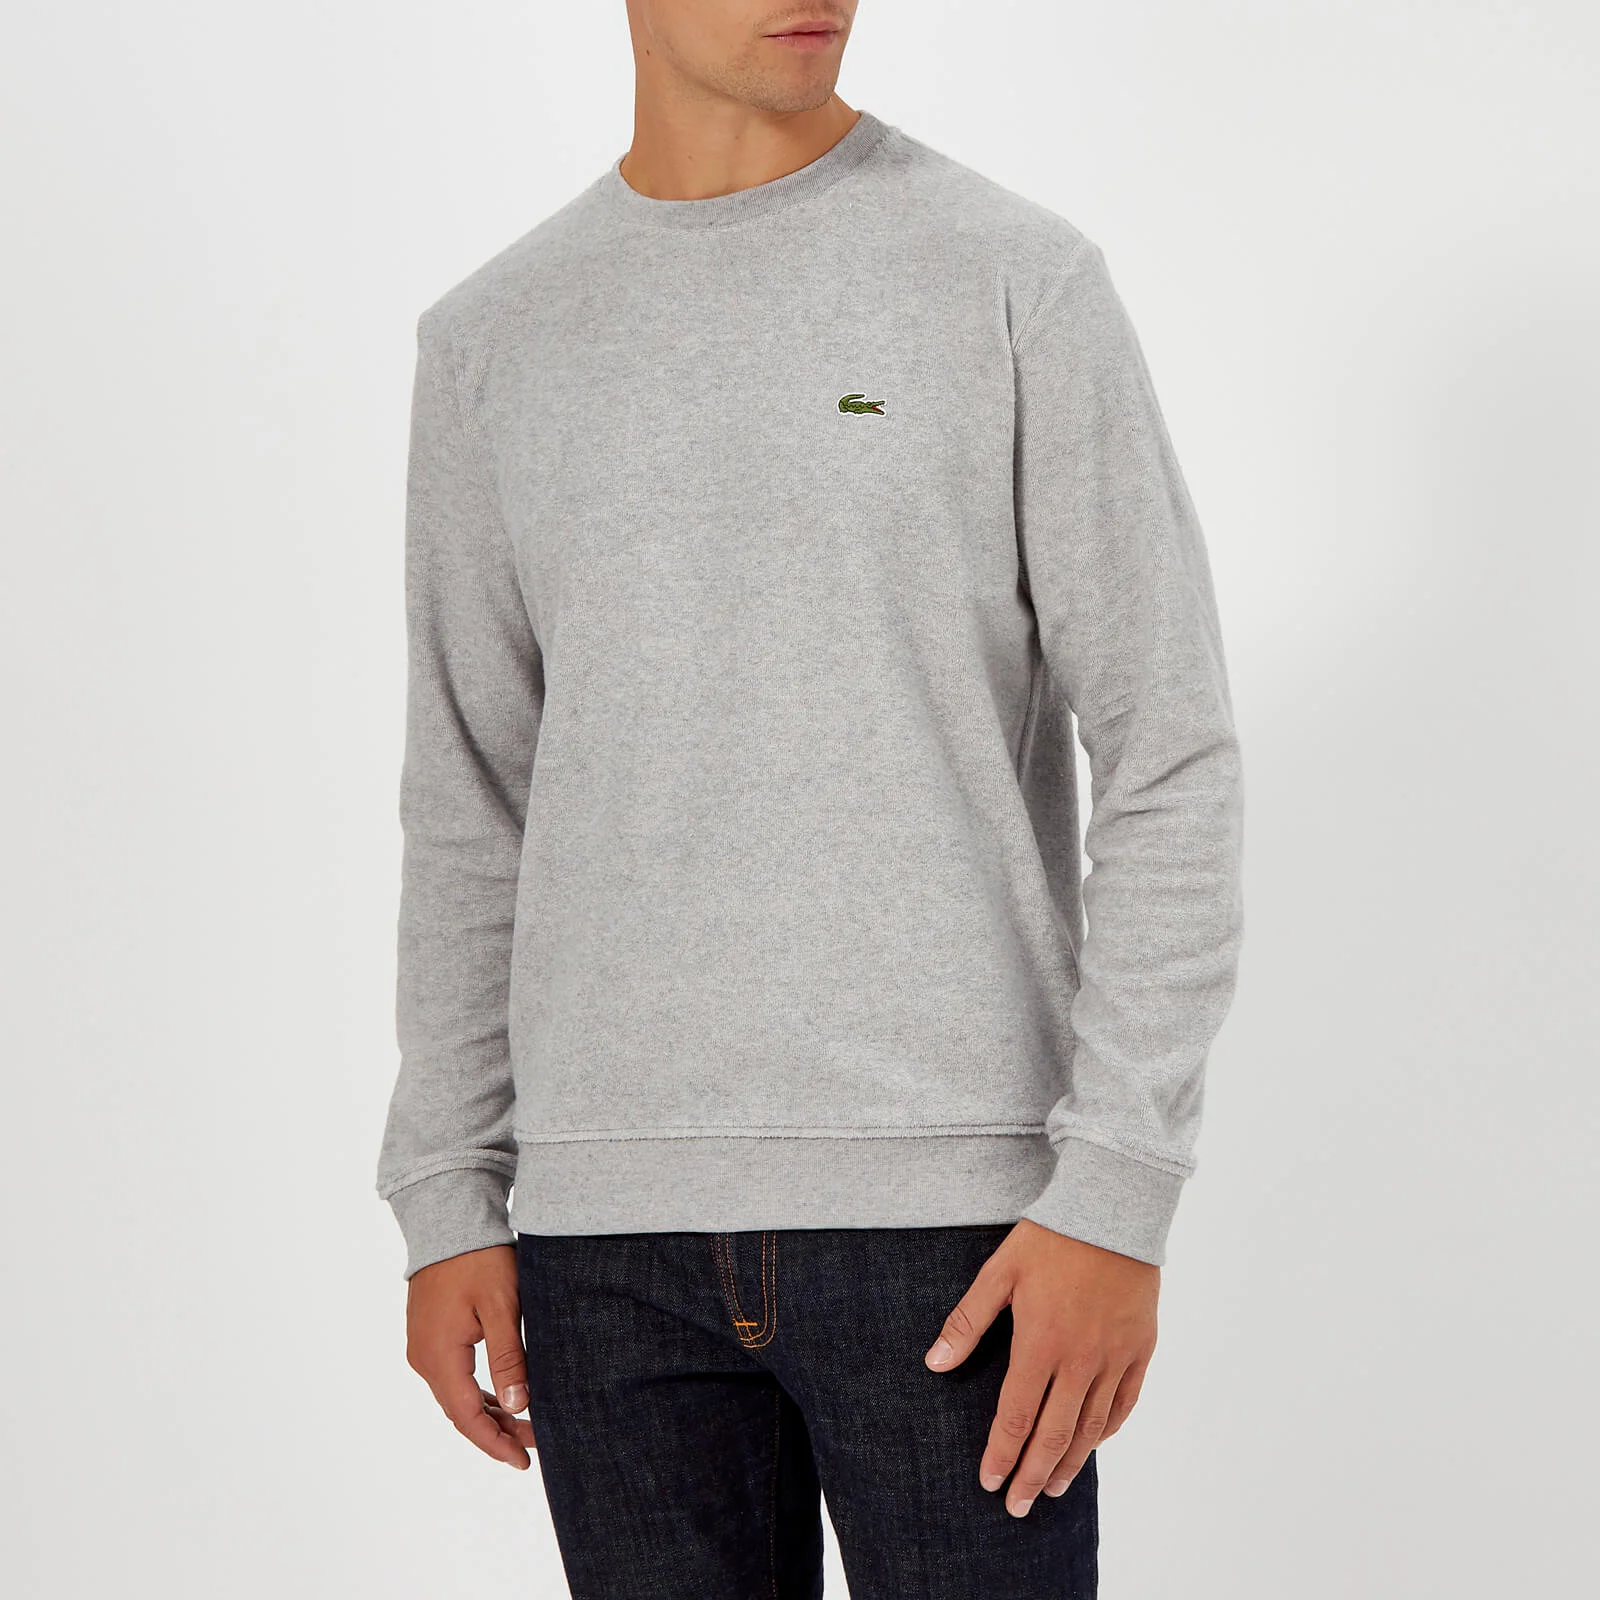 Lacoste Men's Terry Towelling Sweatshirt - Pluvier Chine Image 1